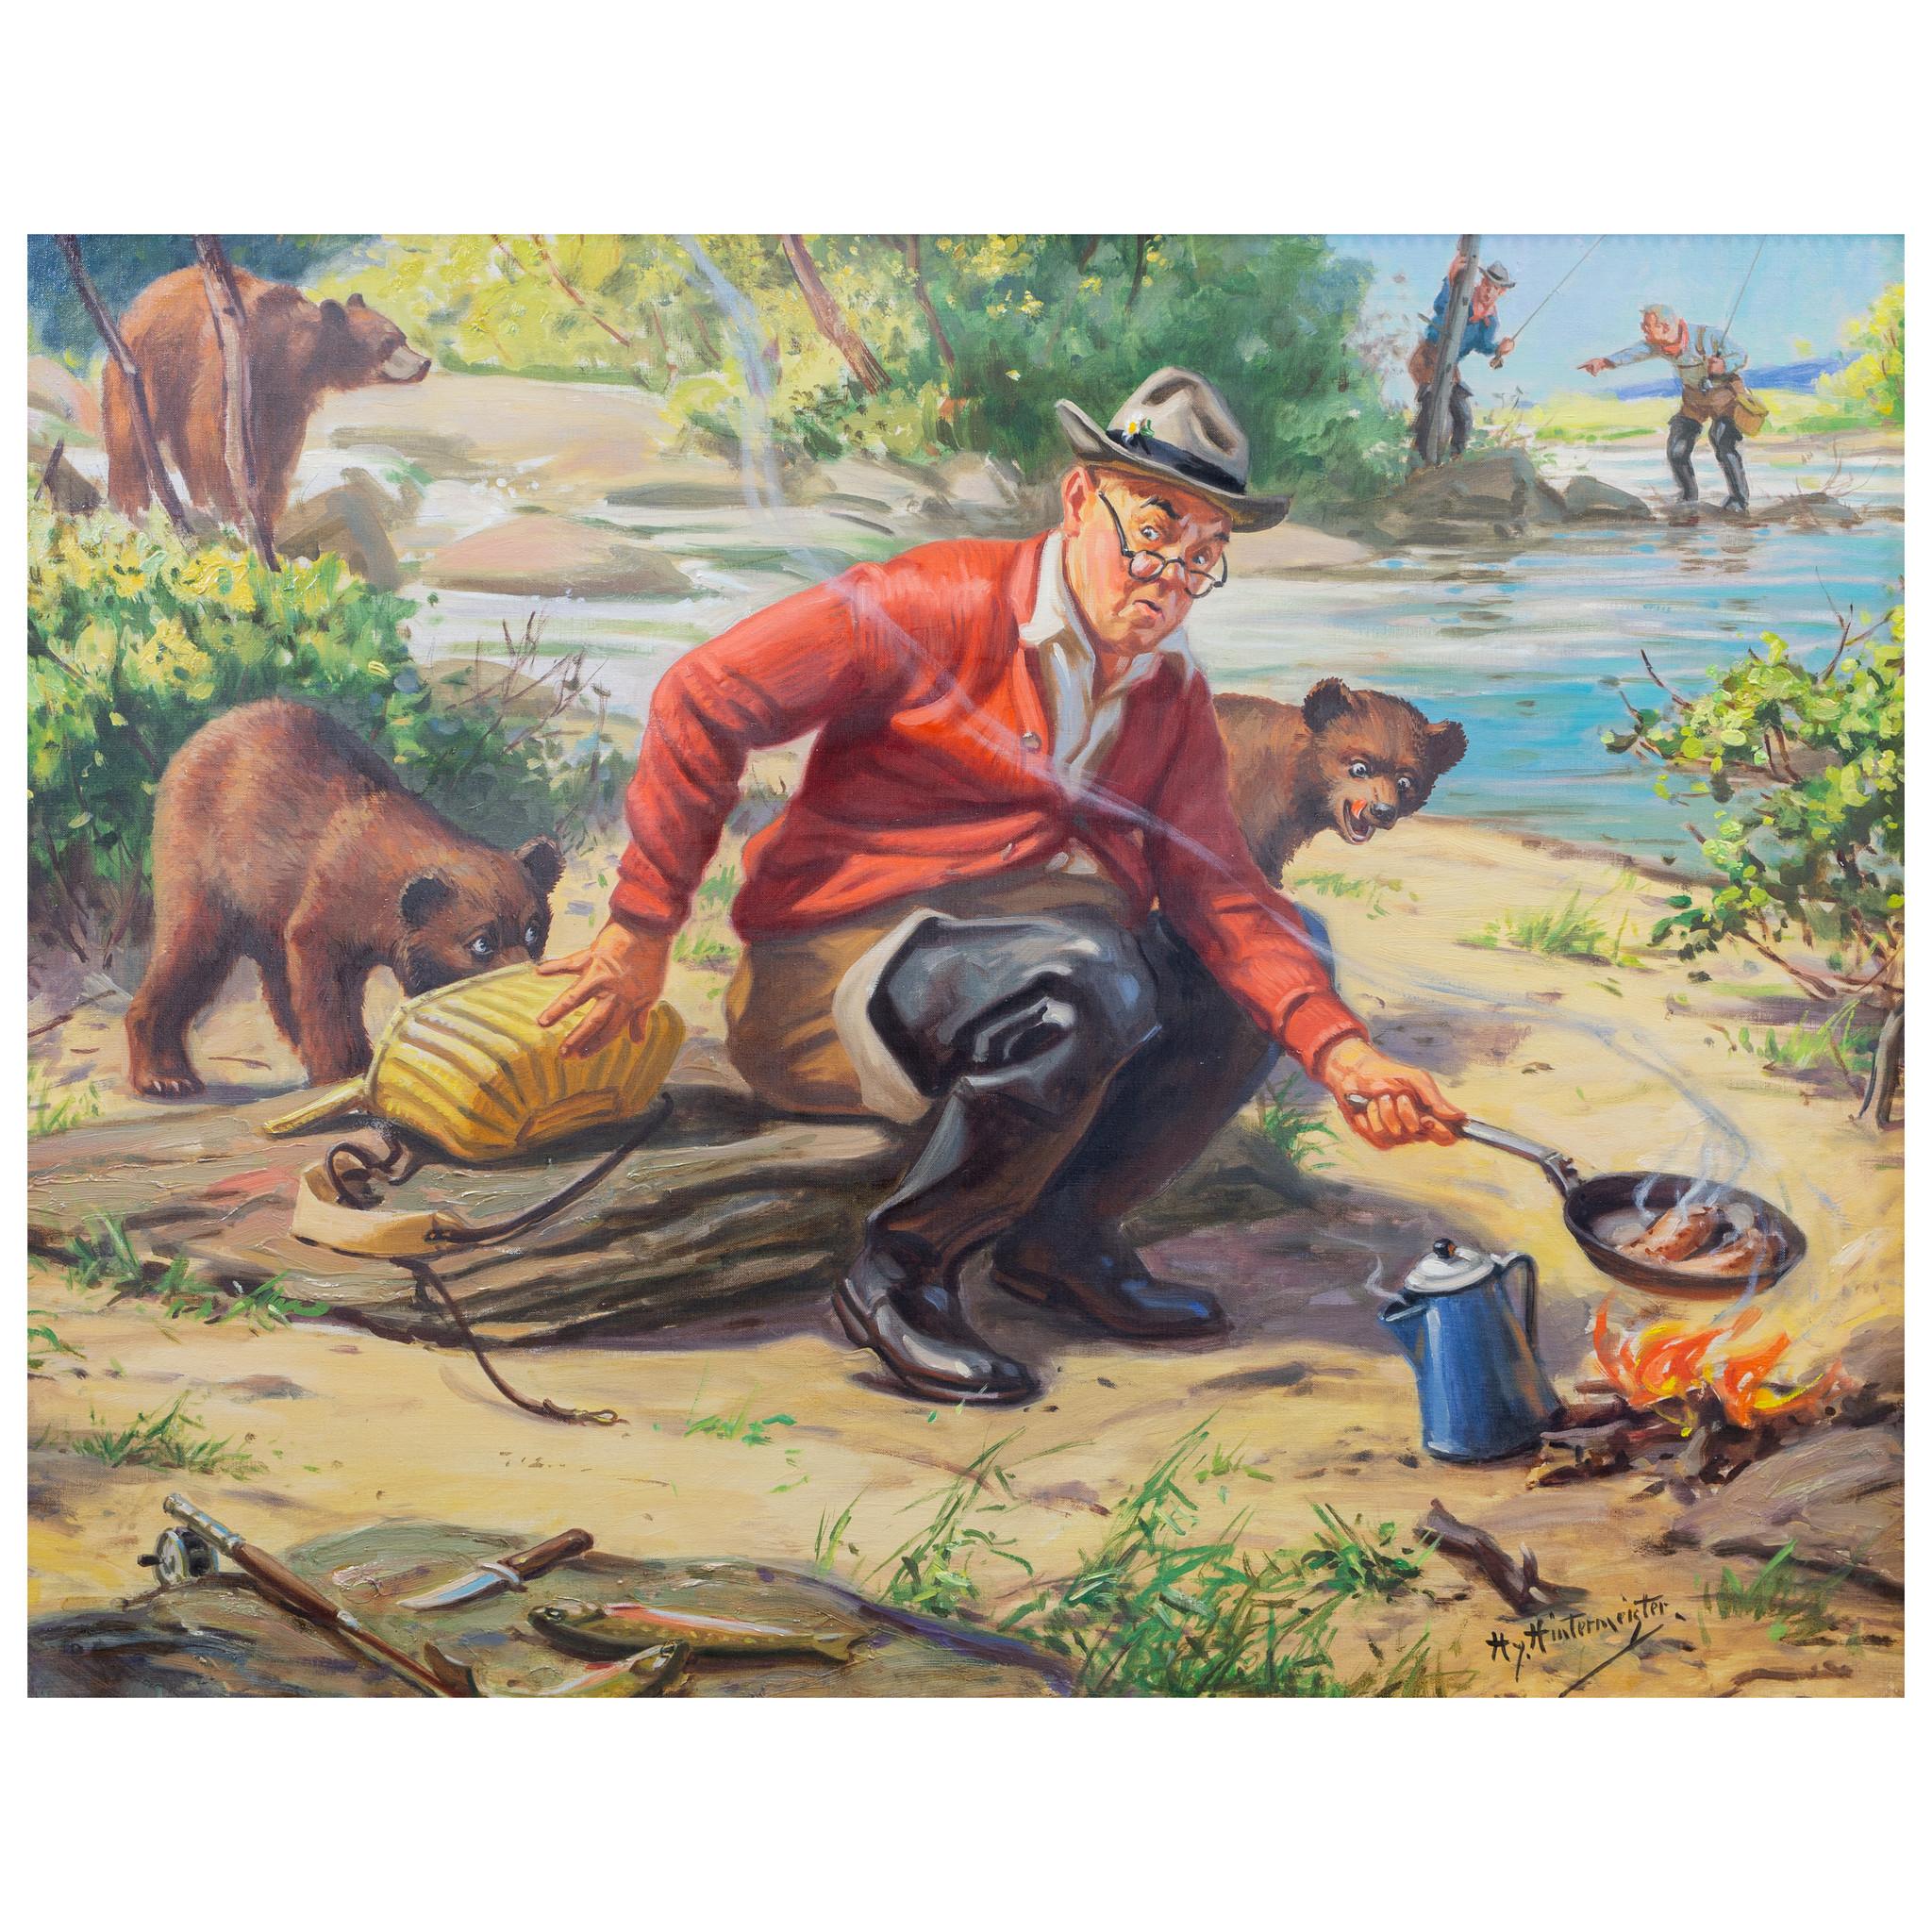 Oil on canvas by Hy Hintermeister 1897-1972. From the archives of the Shaw Barton Calendar company. Used for early calendar print. Part of the humorous fishing series he started. 27”x22”. Well framed.

Henry Hintermeister was born in 1897 in New